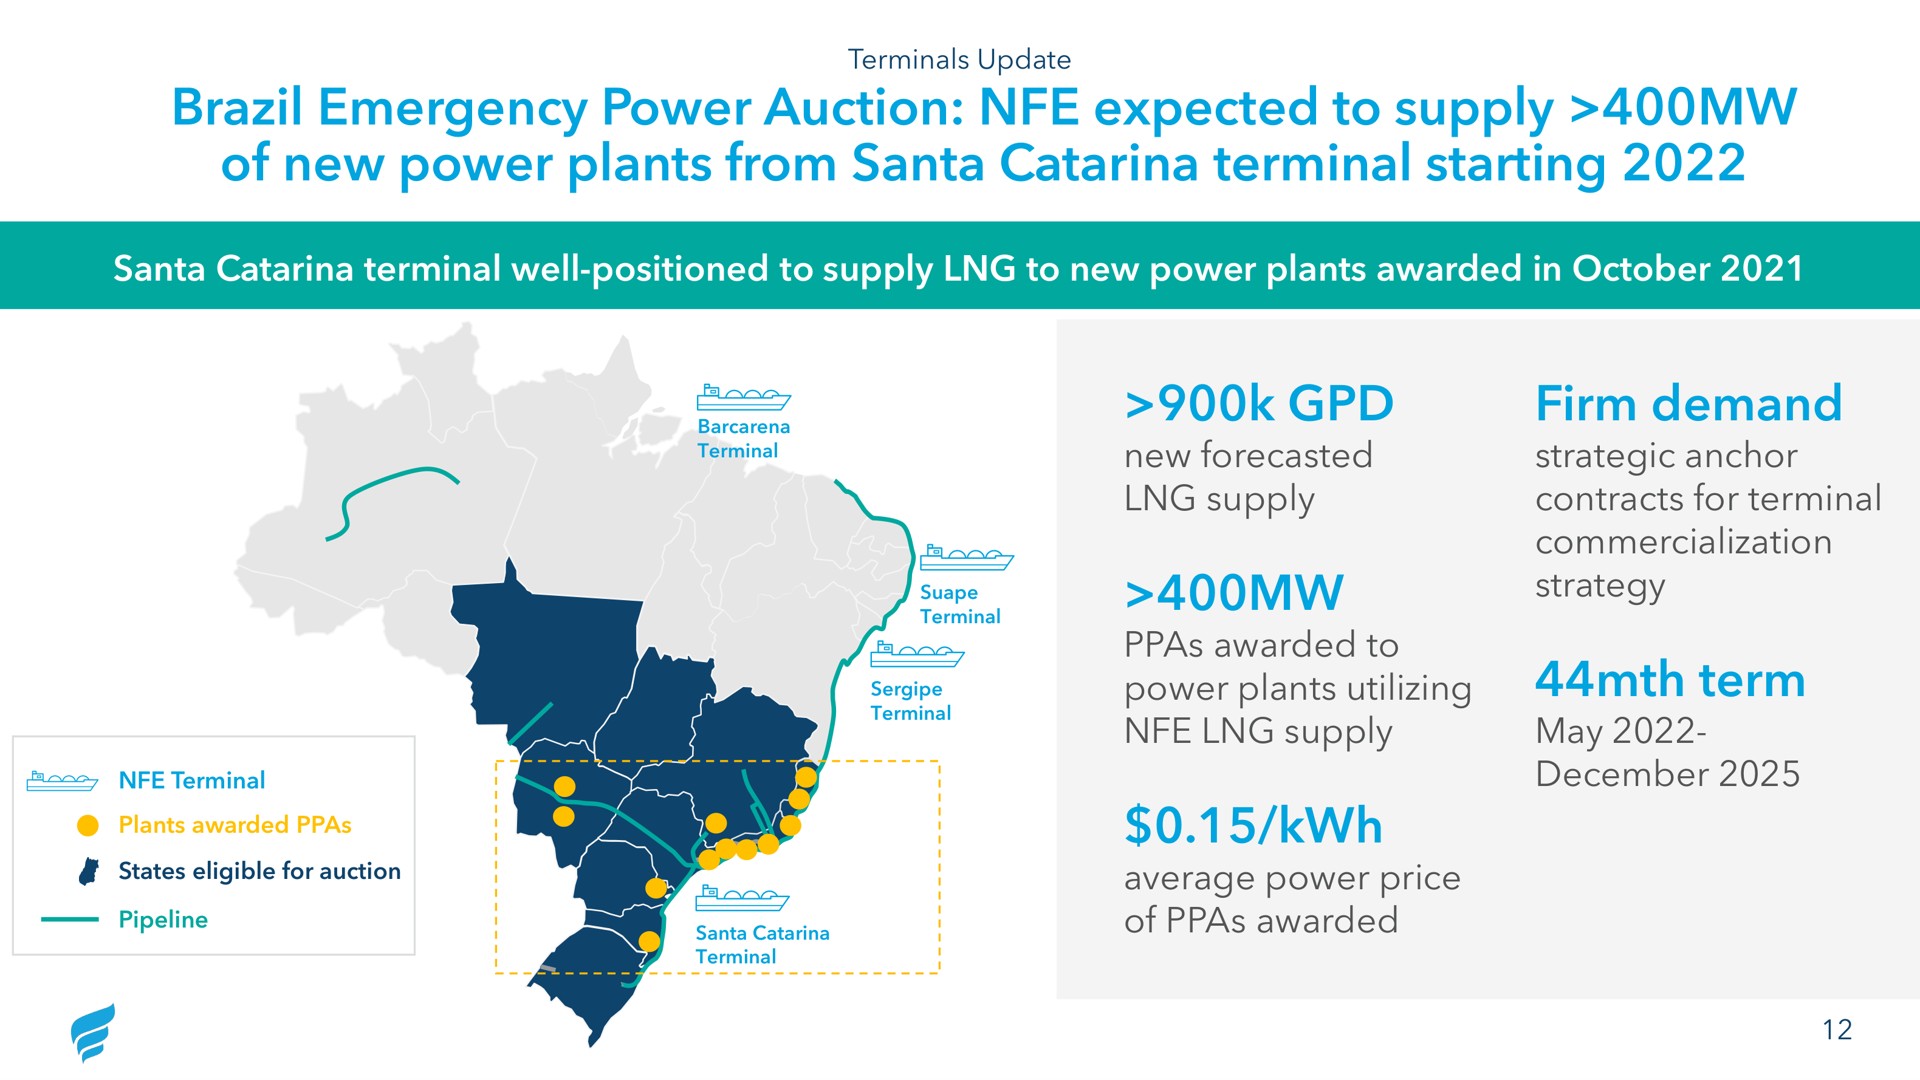 brazil emergency power auction expected to supply of new power plants from terminal starting firm demand term | NewFortress Energy